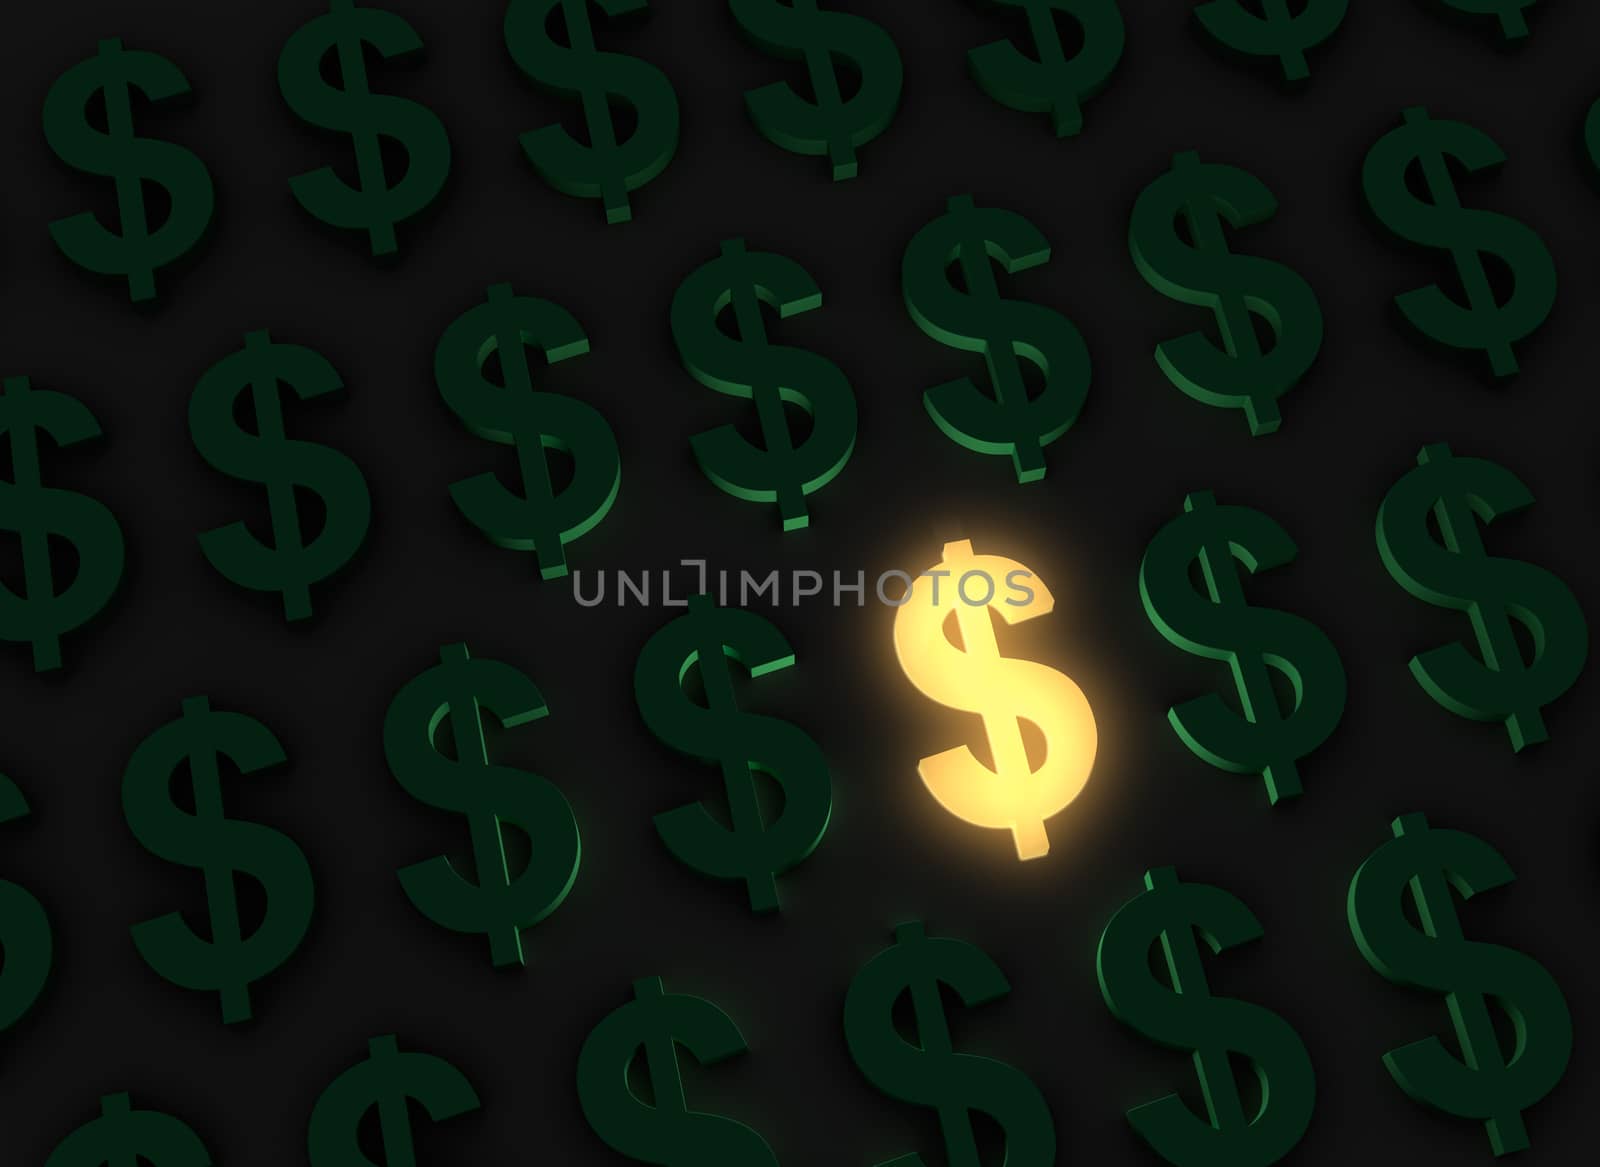 A bright, glowing yellow dollar sign stands out in a dark field of green dollar signs